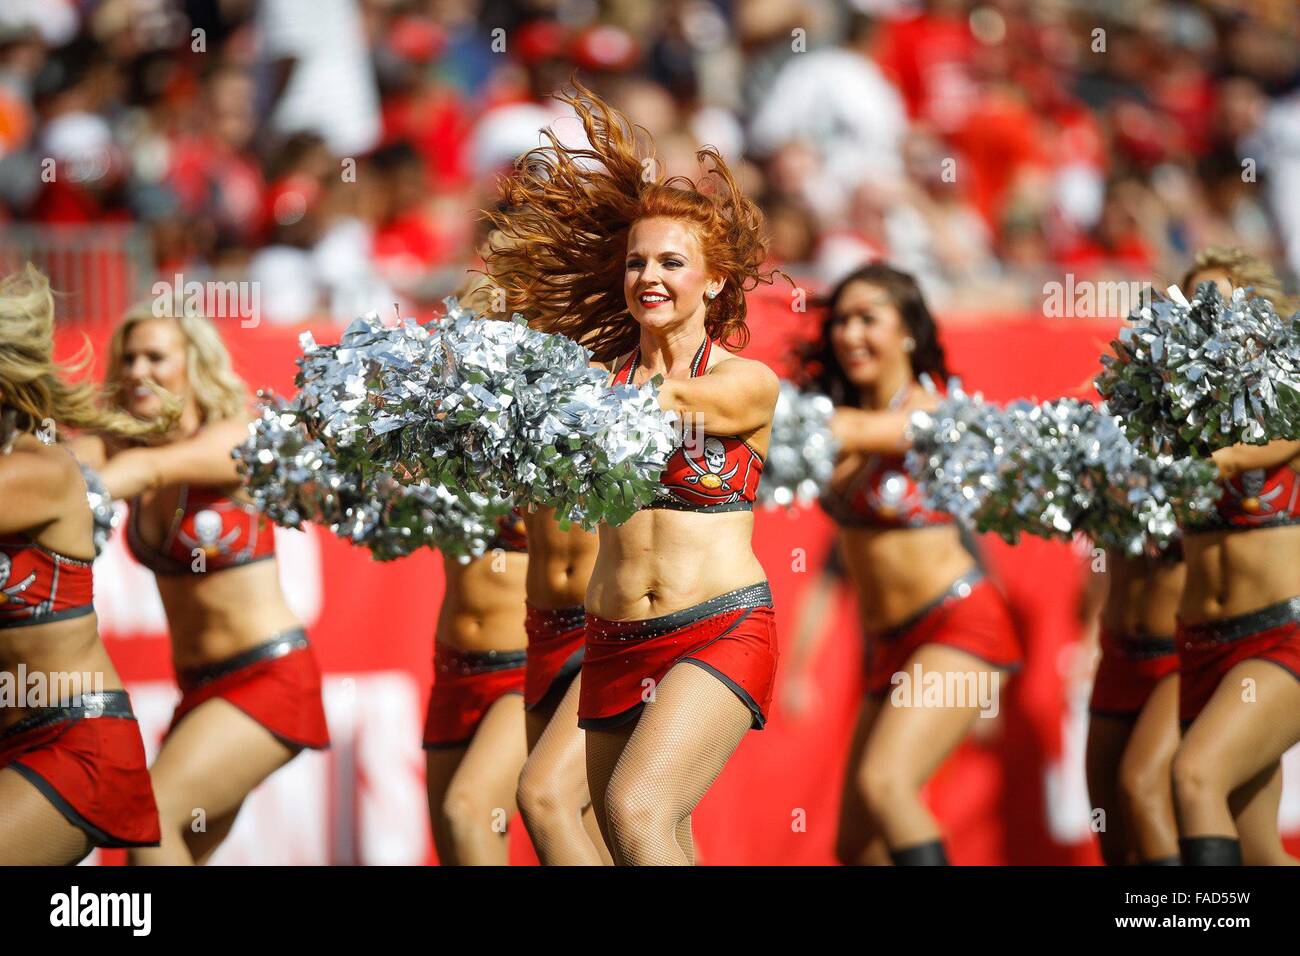 Tampa, Florida, USA. 27th Dec, 2015. LOREN ELLIOTT | Times.The Bucs cheerleaders perform during a football game between the Chicago Bears and Tampa Bay Buccaneers at Raymond James Stadium in Tampa, Fla., on Sunday, Dec. 27, 2015. Credit:  Loren Elliott/Tampa Bay Times/ZUMA Wire/Alamy Live News Stock Photo